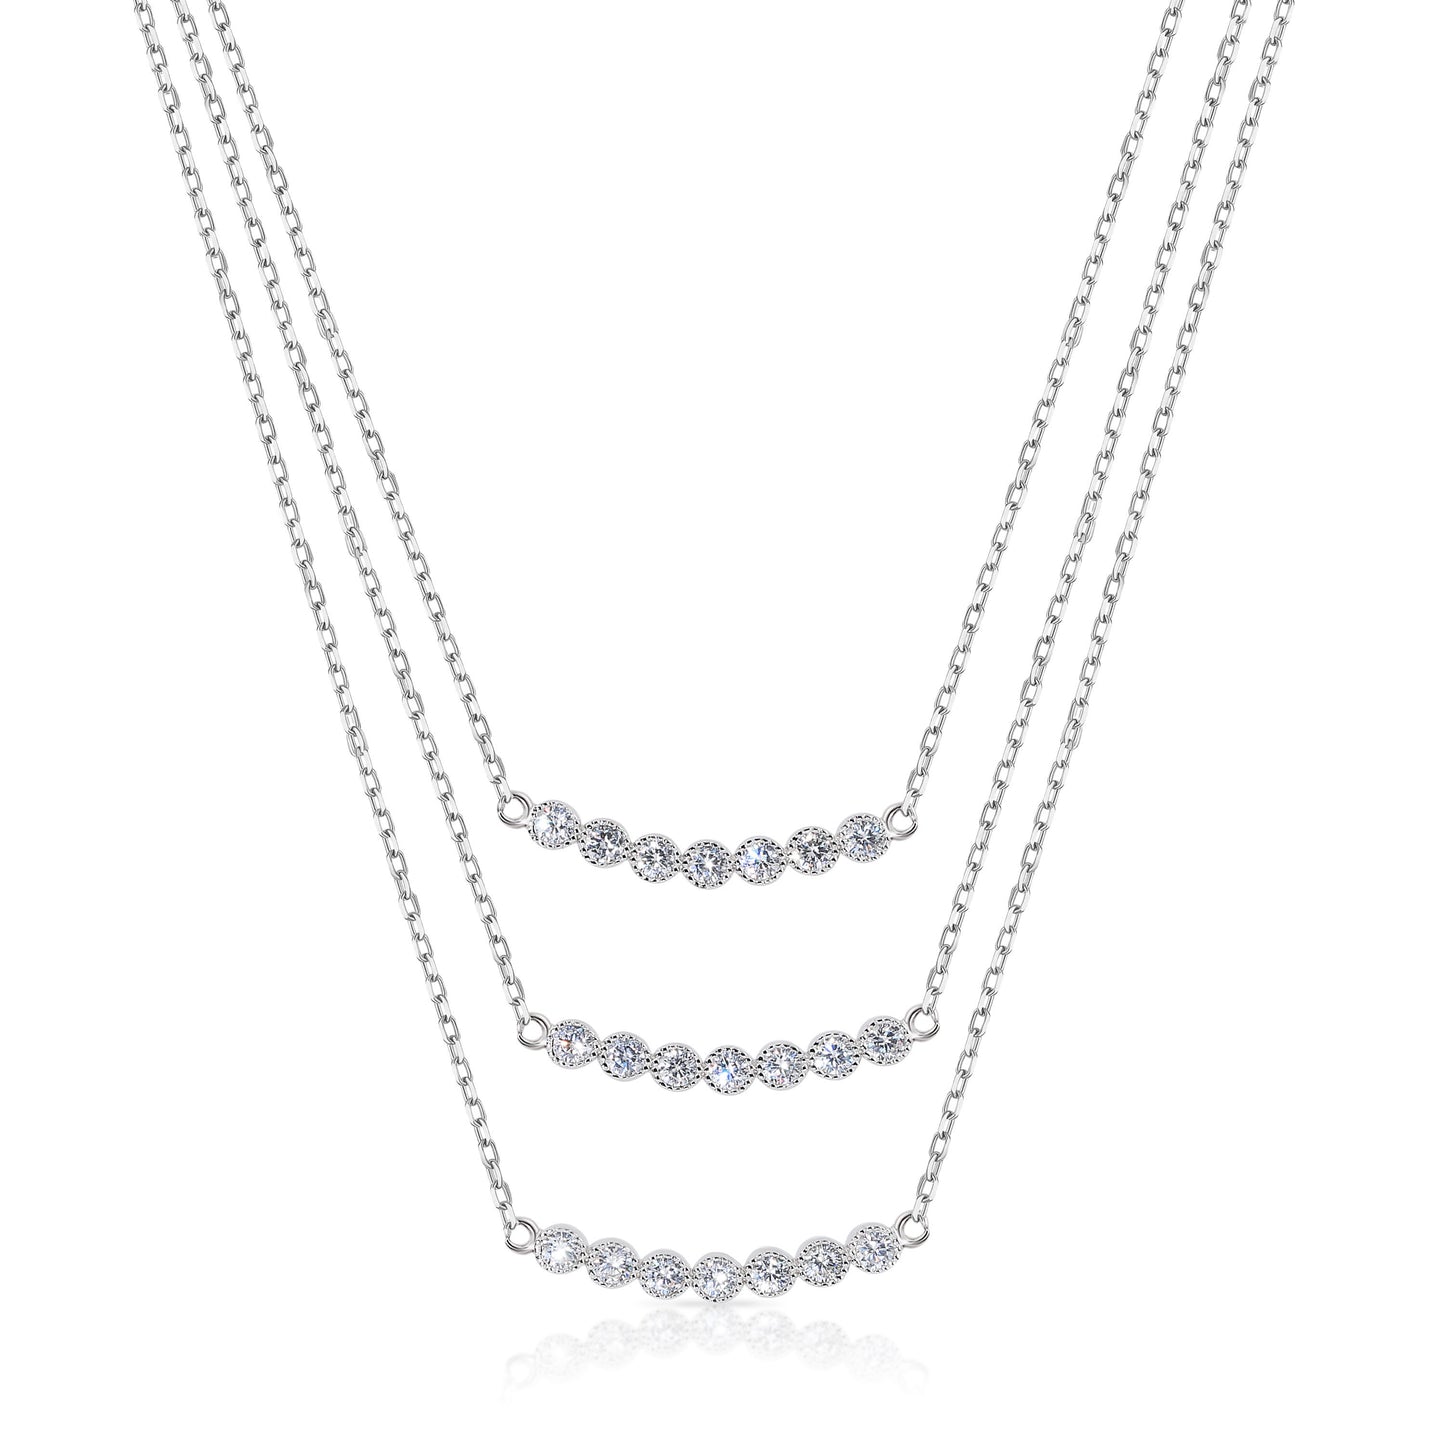 Three Layer Floating Necklace in Sterling Silver, Handmade with Adjustable Length